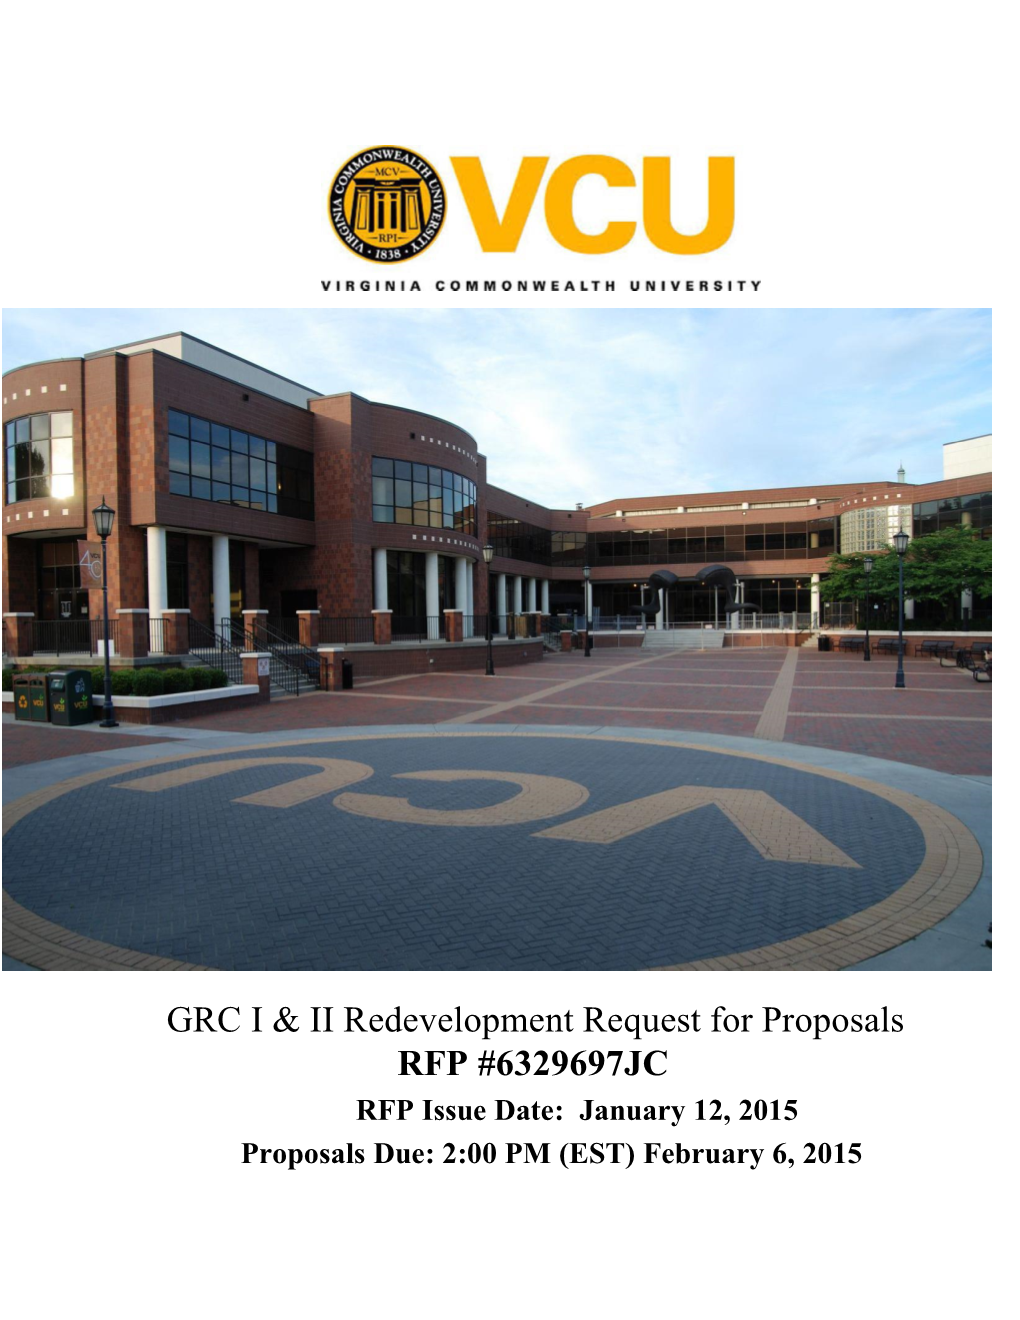 GRC I & II Redevelopment Request for Proposals RFP #6329697JC